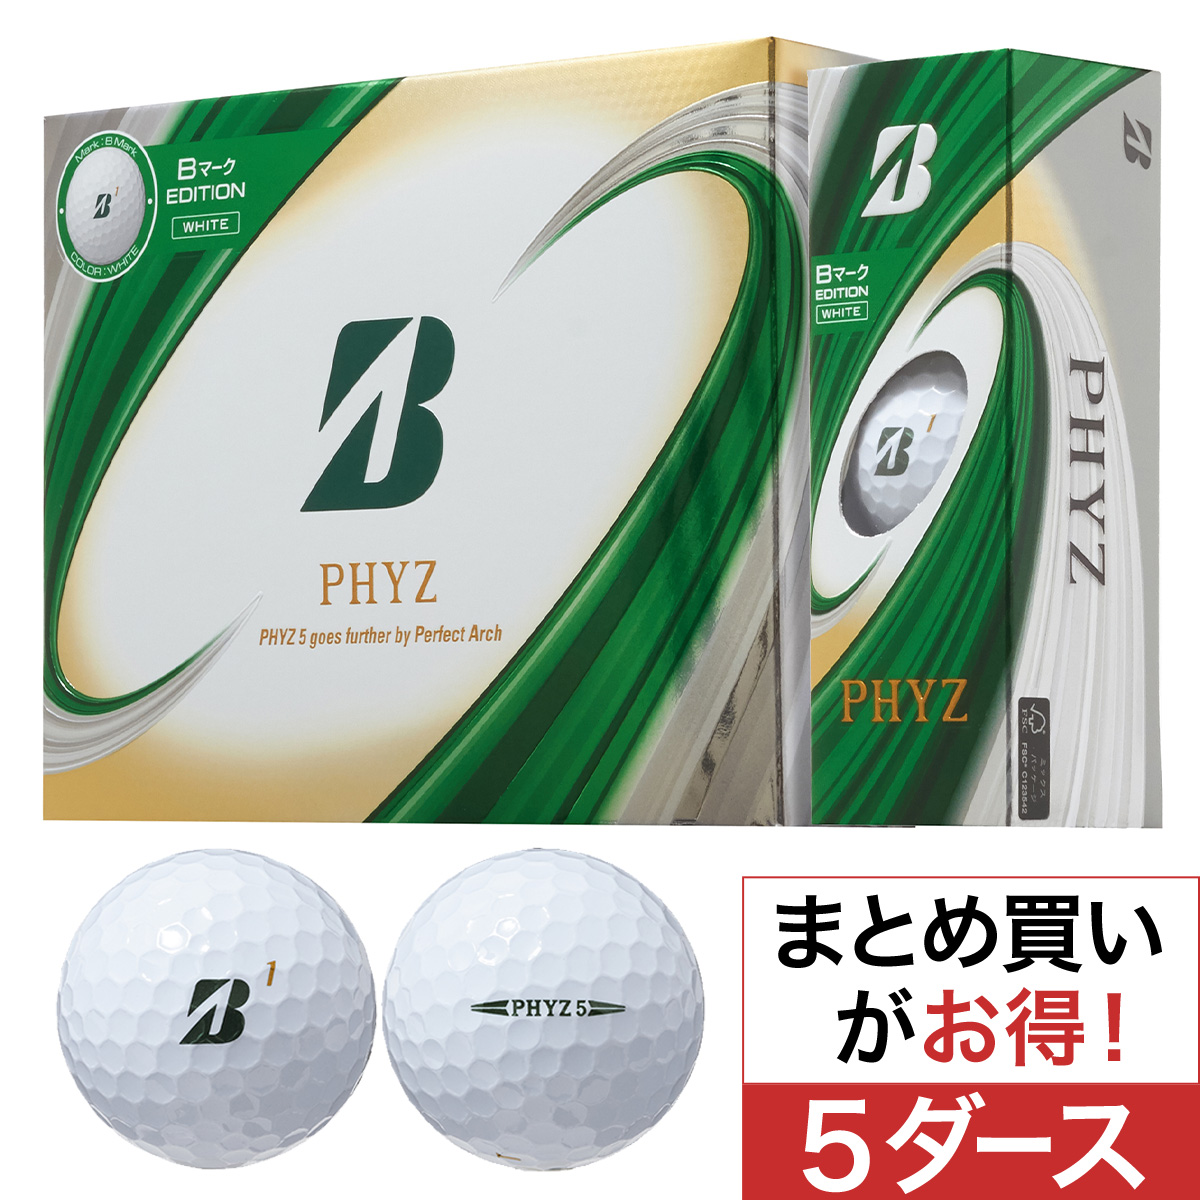  PHYZ BマークEdition ボール 5ダースセット 